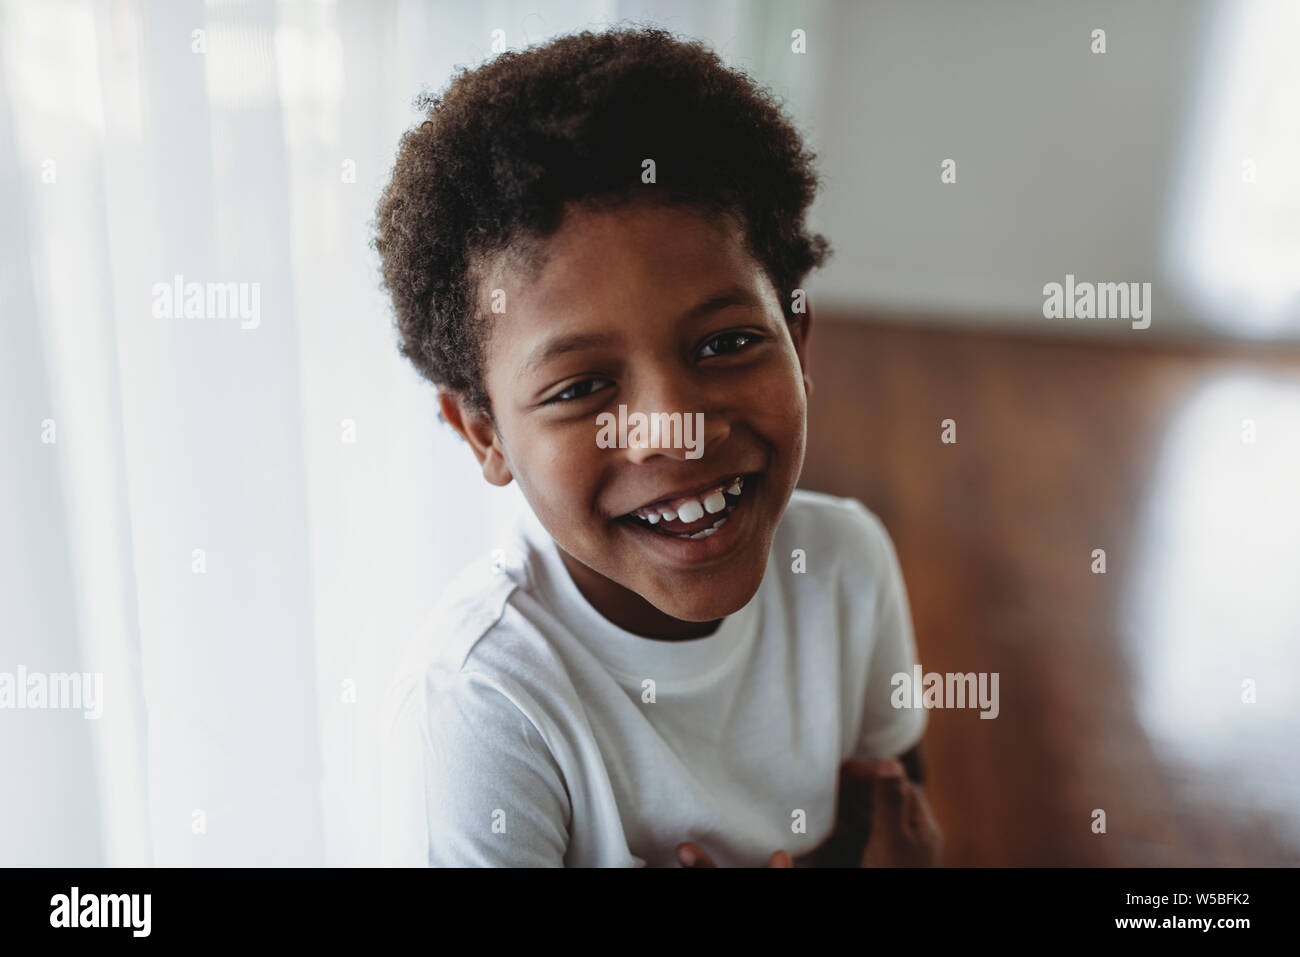 Portrait of school-aged boy looking at camera Banque D'Images